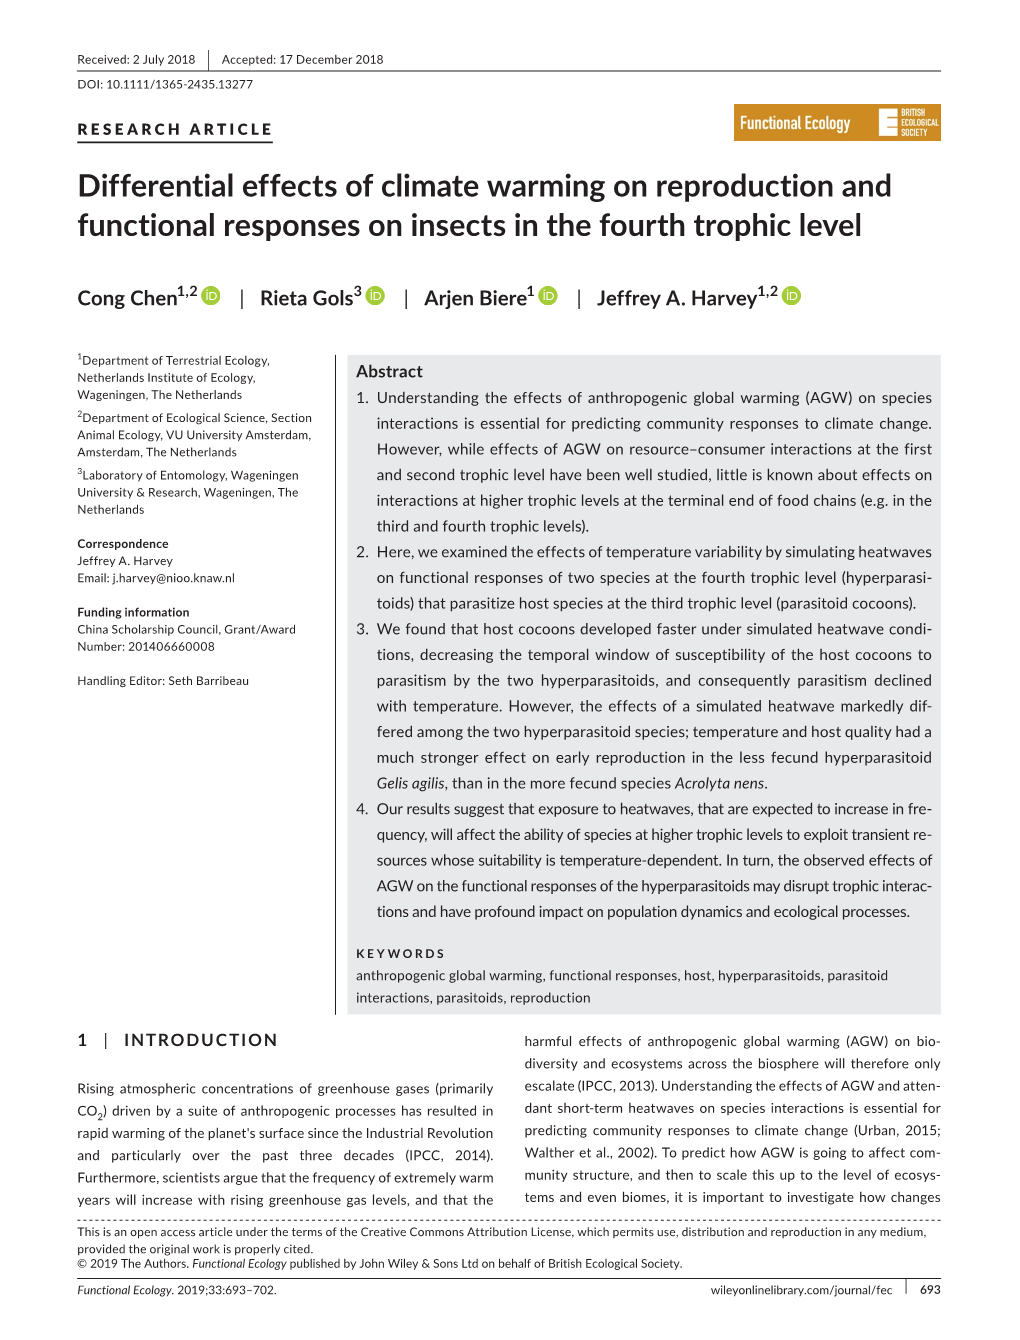 Differential Effects of Climate Warming on Reproduction and Functional Responses on Insects in the Fourth Trophic Level